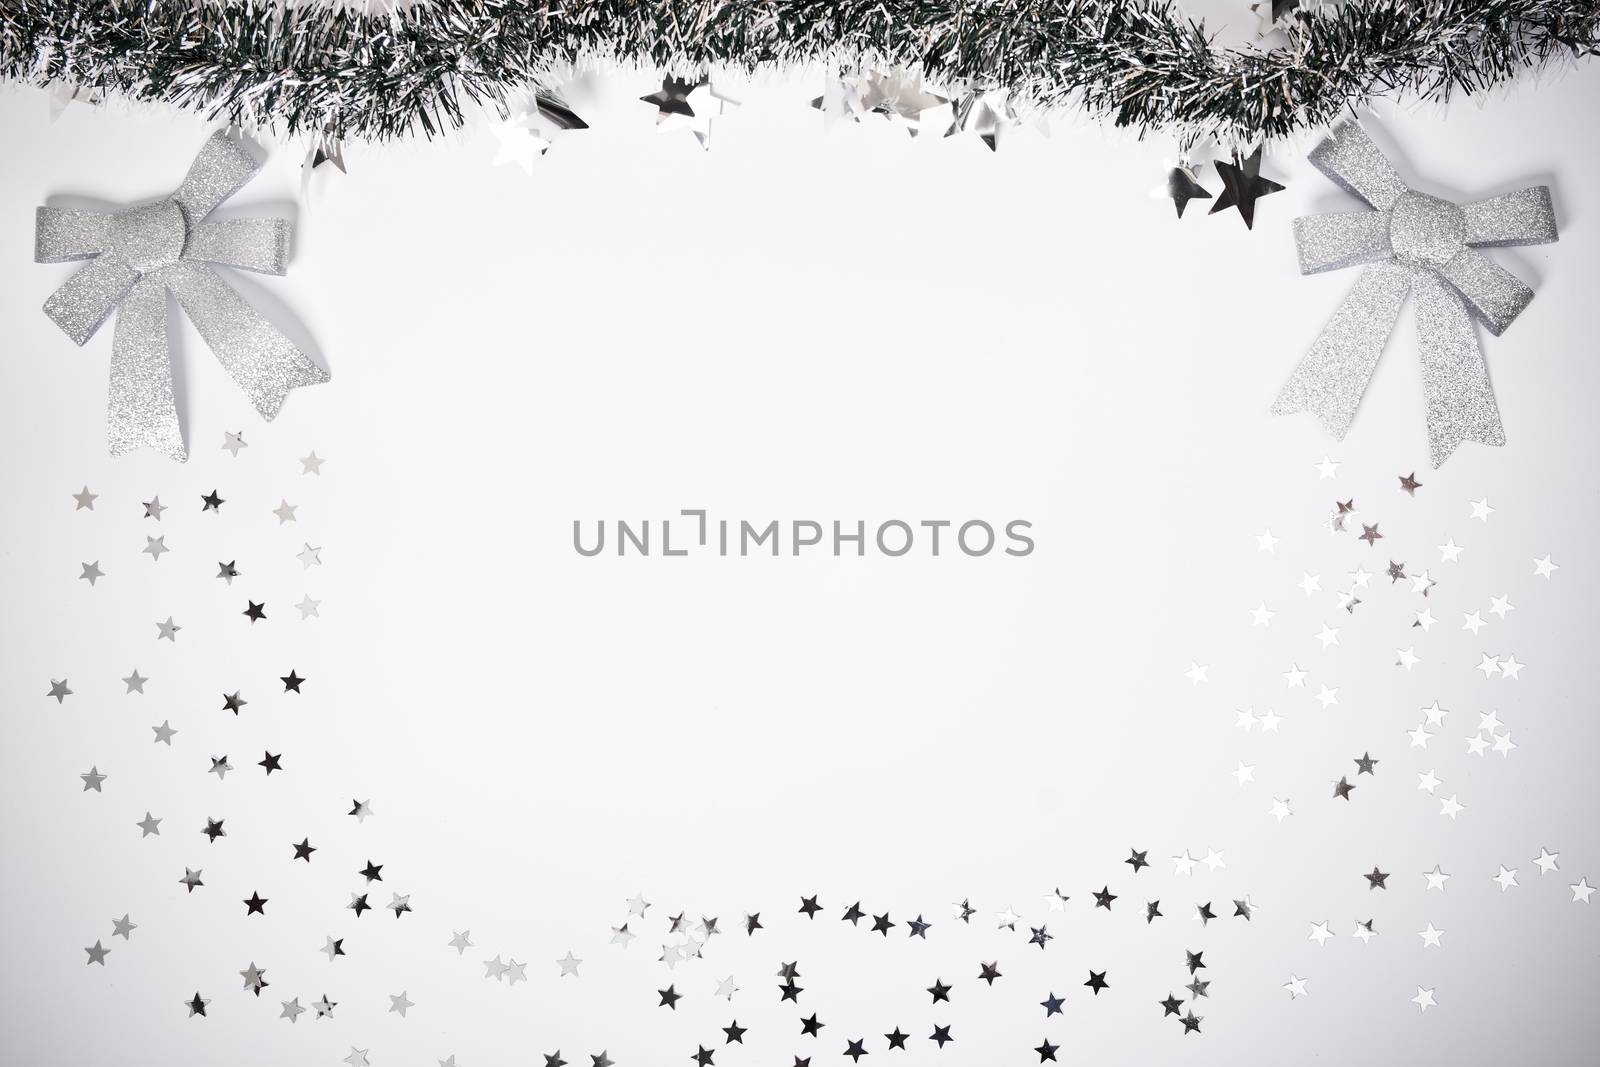 Seasonal composition with garland and stars by Mendelex